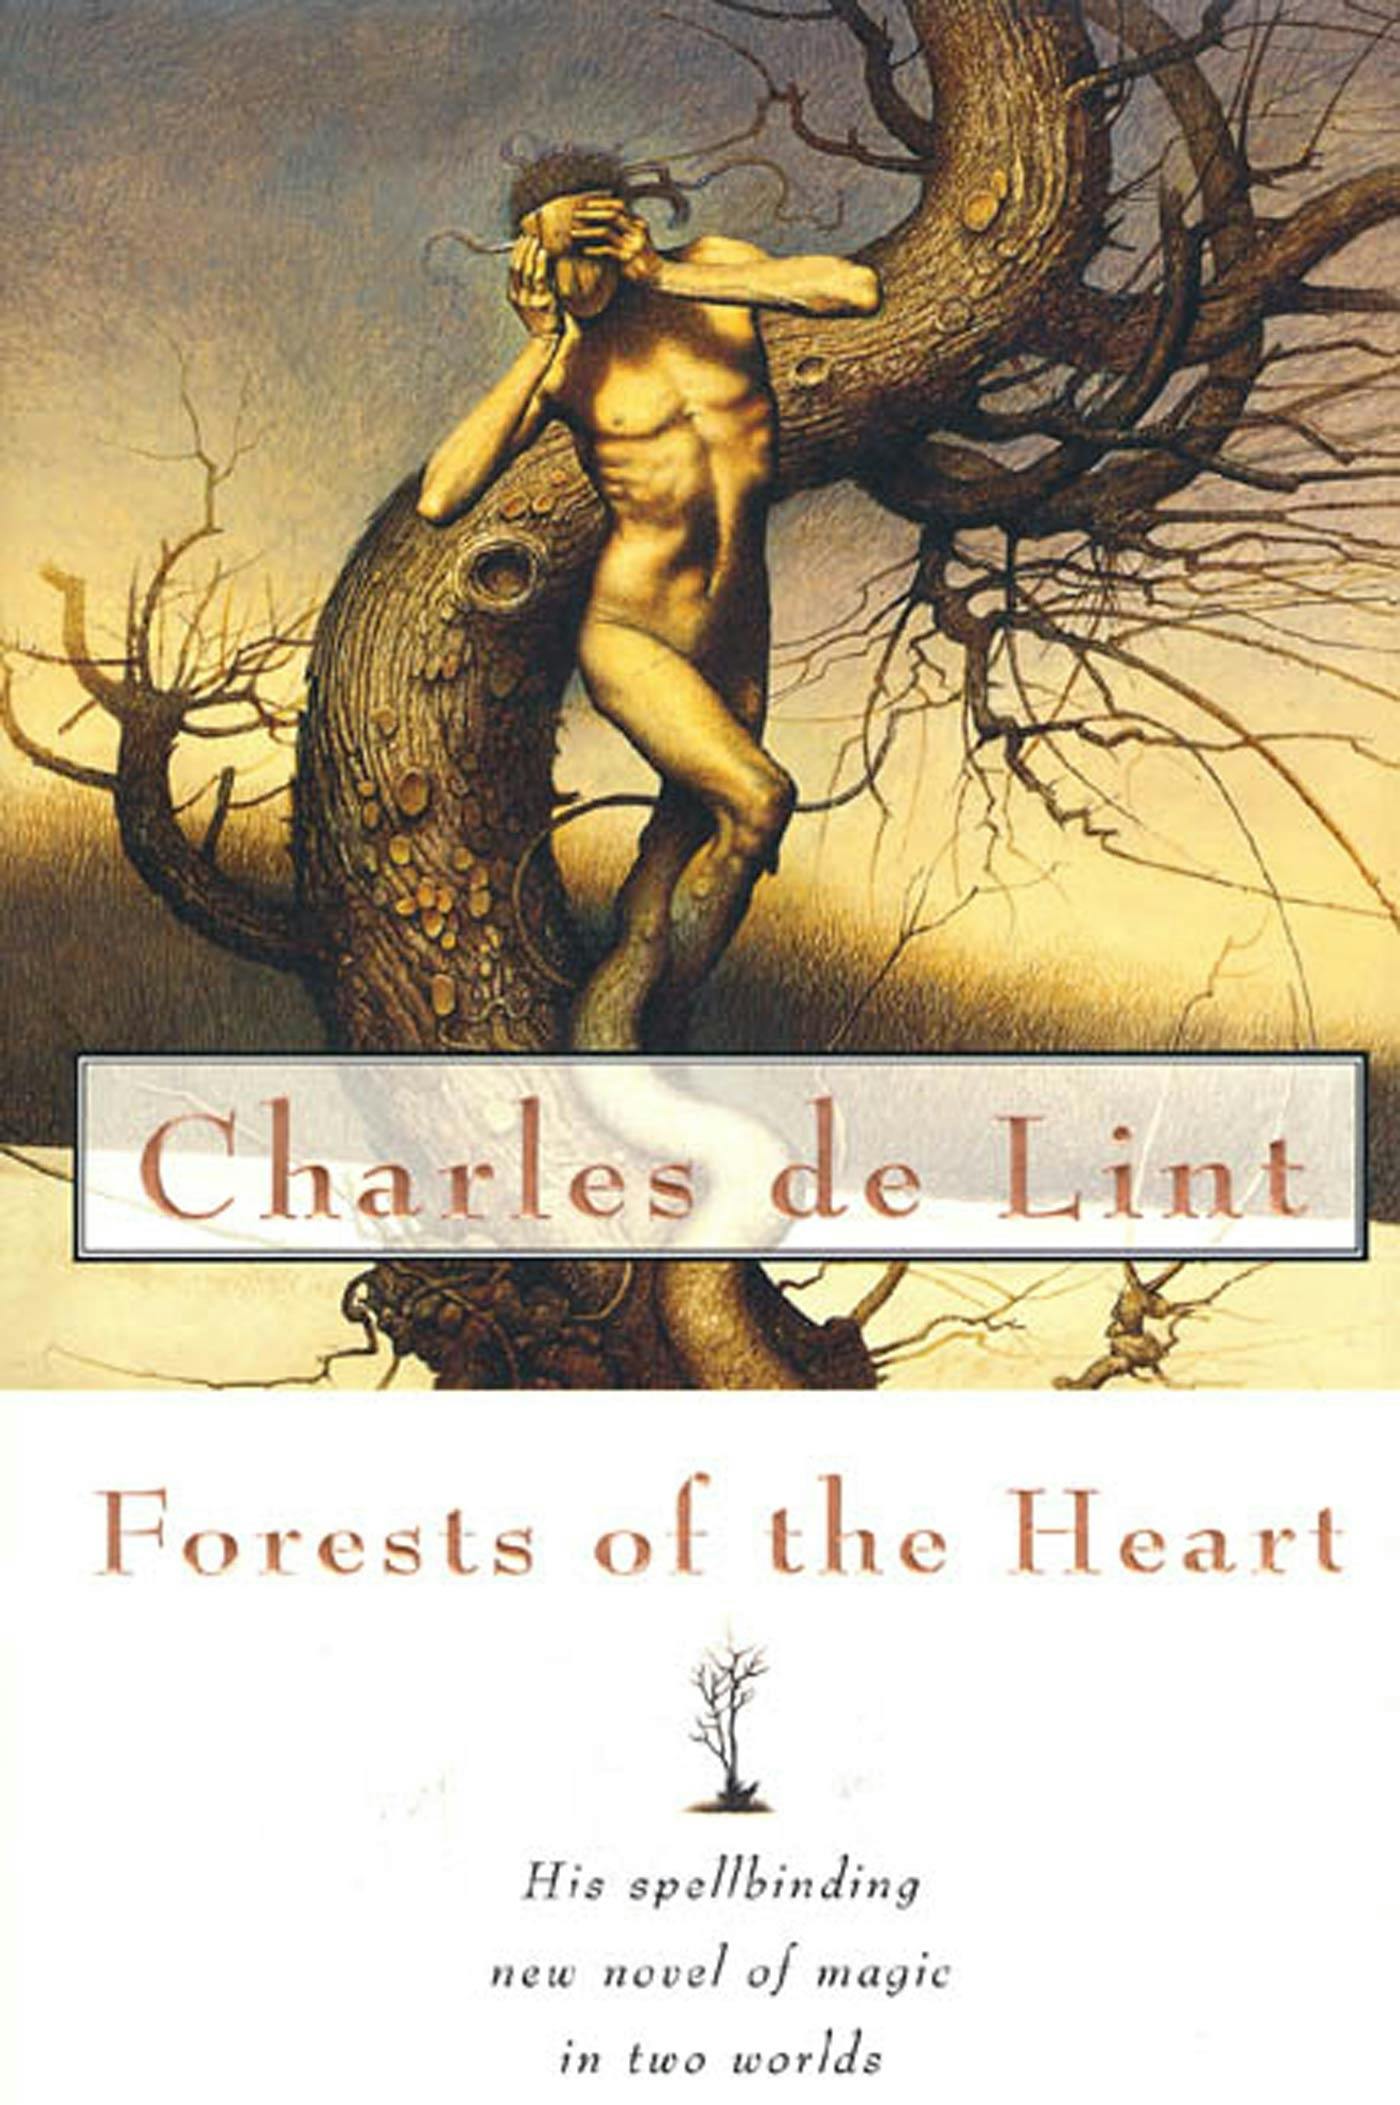 Cover for the book titled as: Forests of the Heart